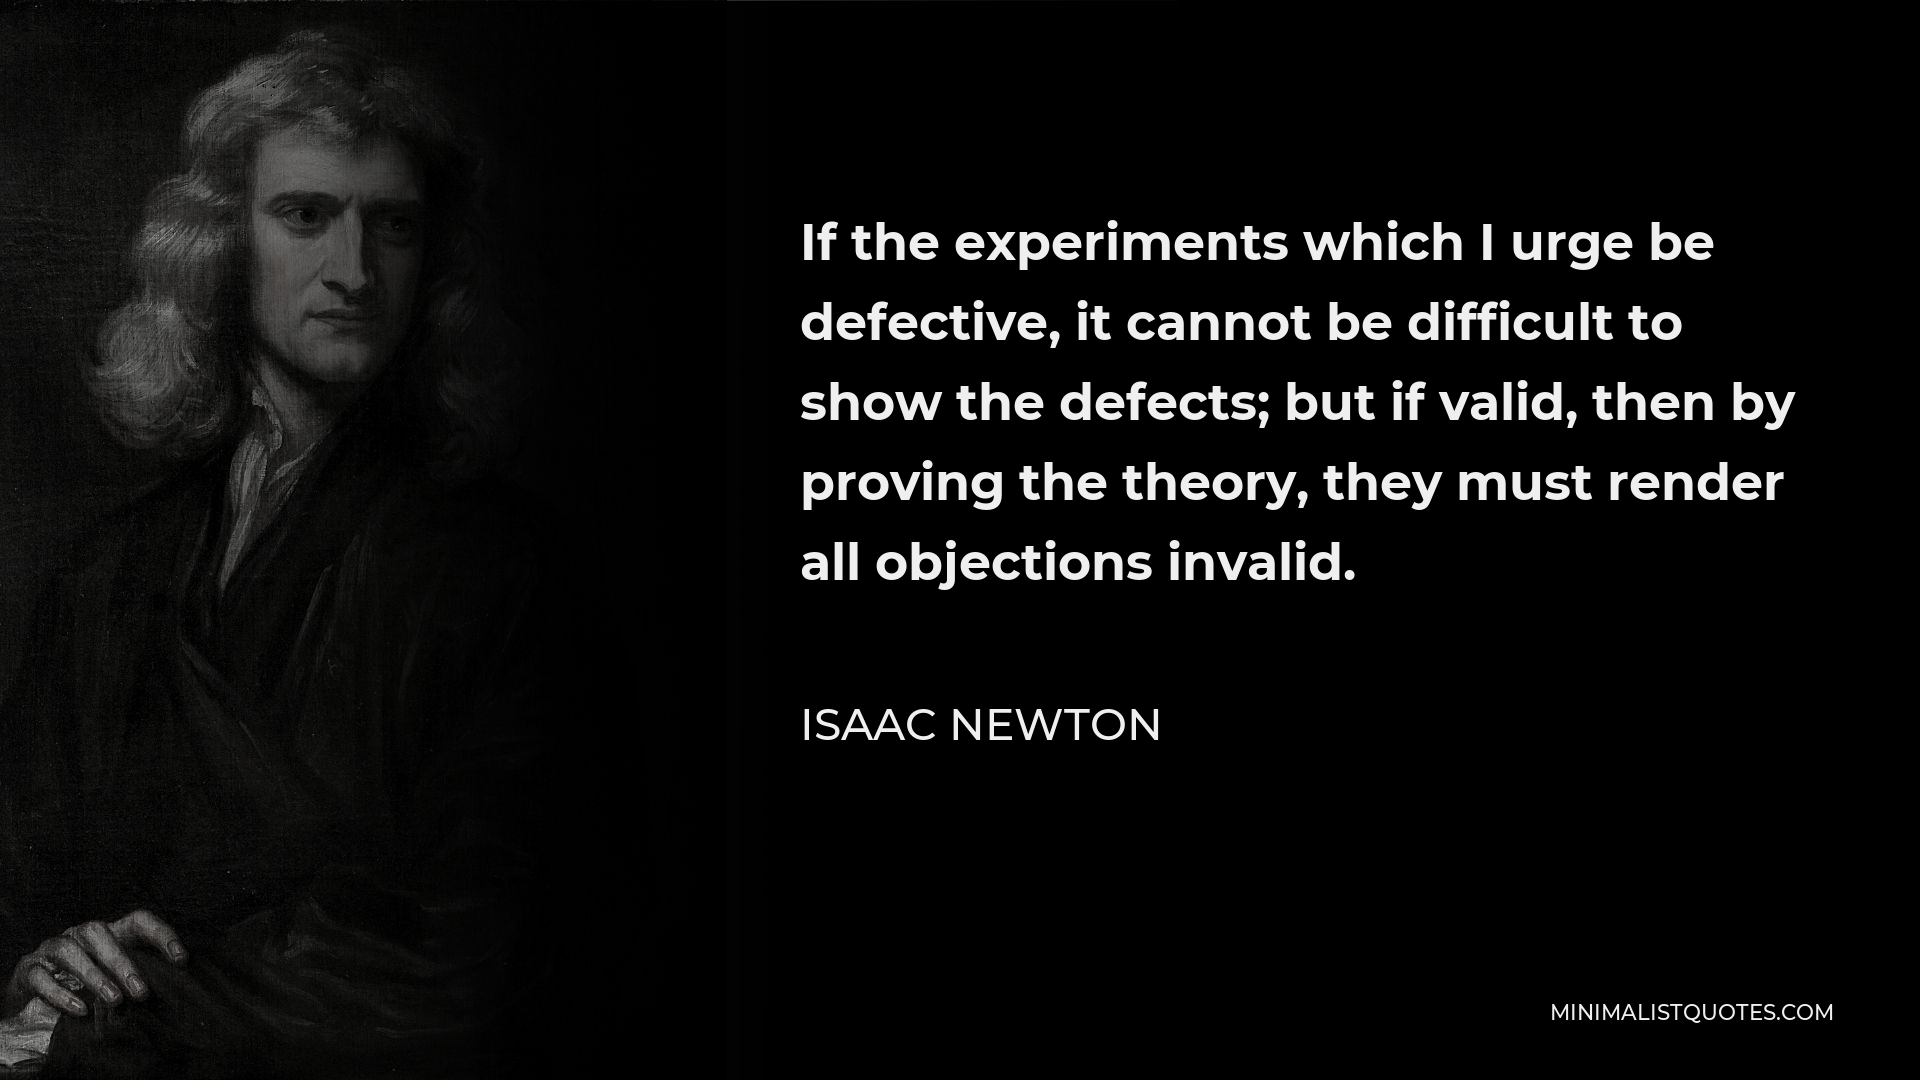 Isaac Newton Quote - If the experiments which I urge be defective, it cannot be difficult to show the defects; but if valid, then by proving the theory, they must render all objections invalid.